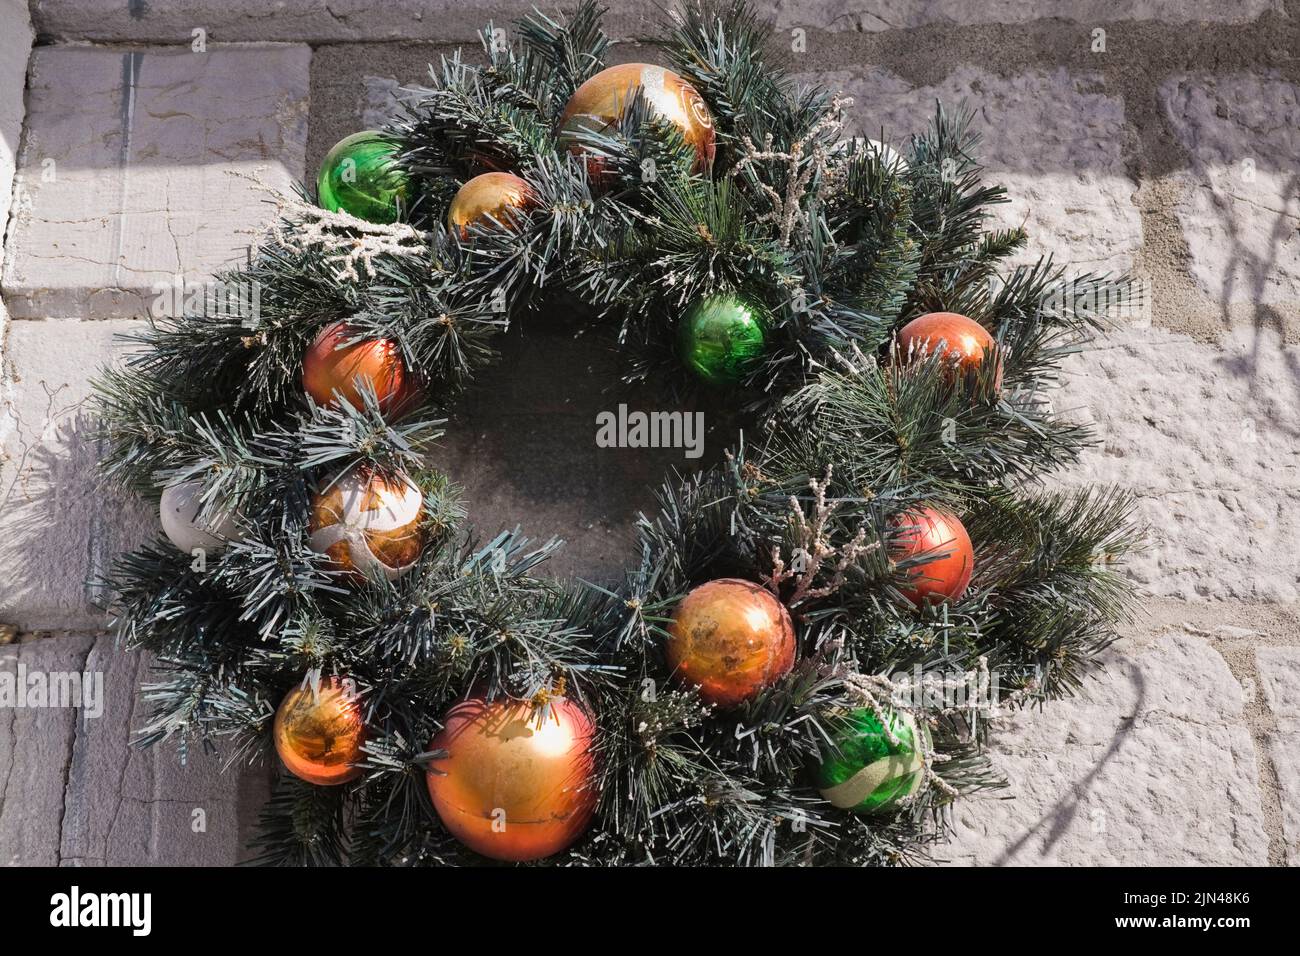 Christmas wreath decorated with ornaments on old stone wall, Quebec, Canada Stock Photo